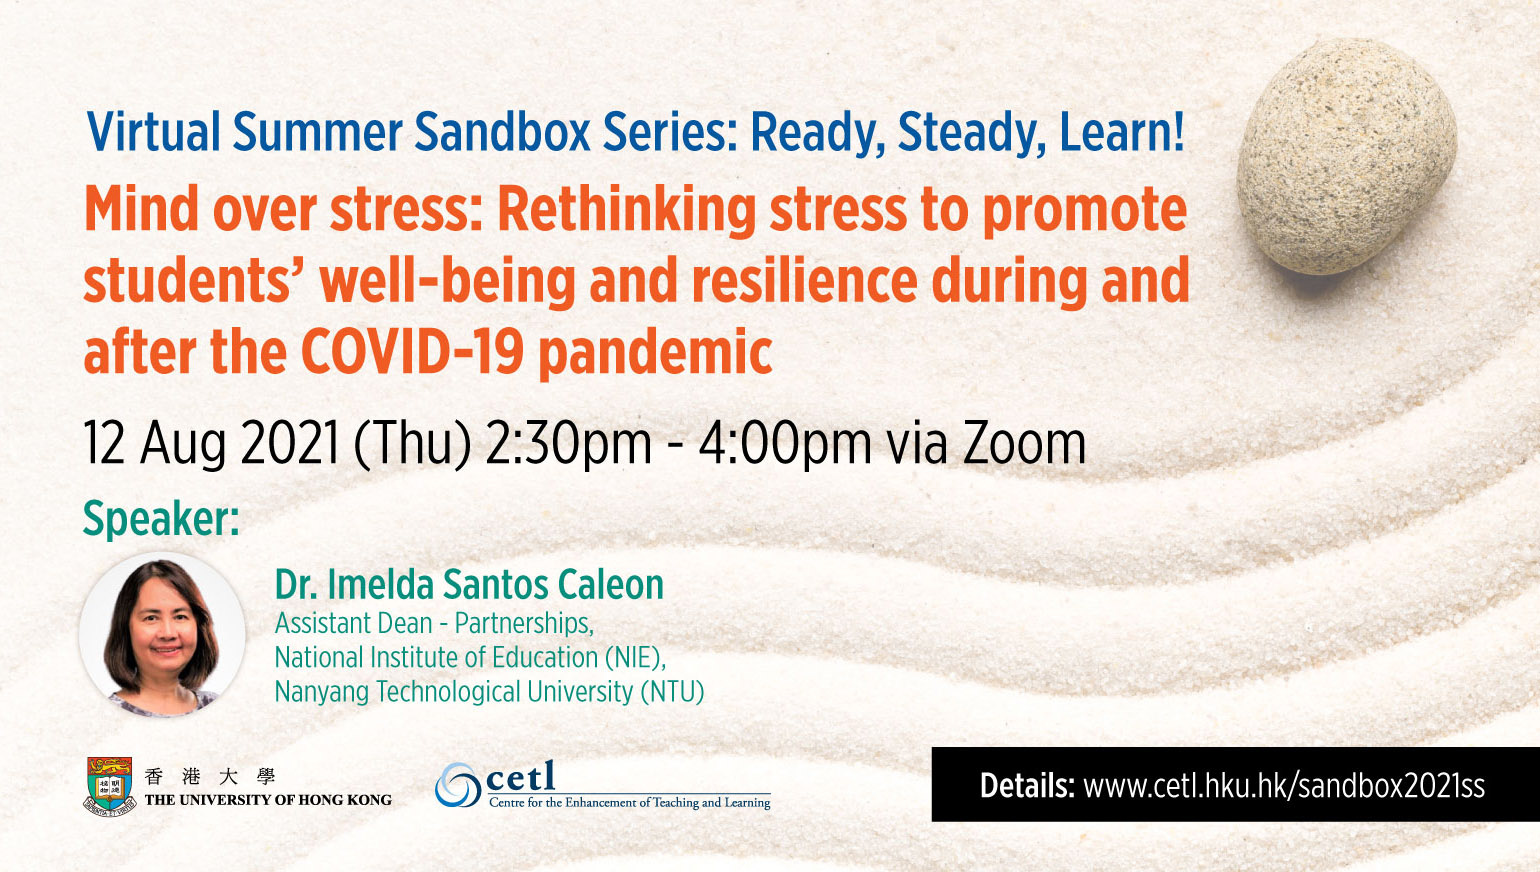 Mind over stress: Rethinking stress to promote studentsâ well-being and resilience during and after the COVID-19 pandemic